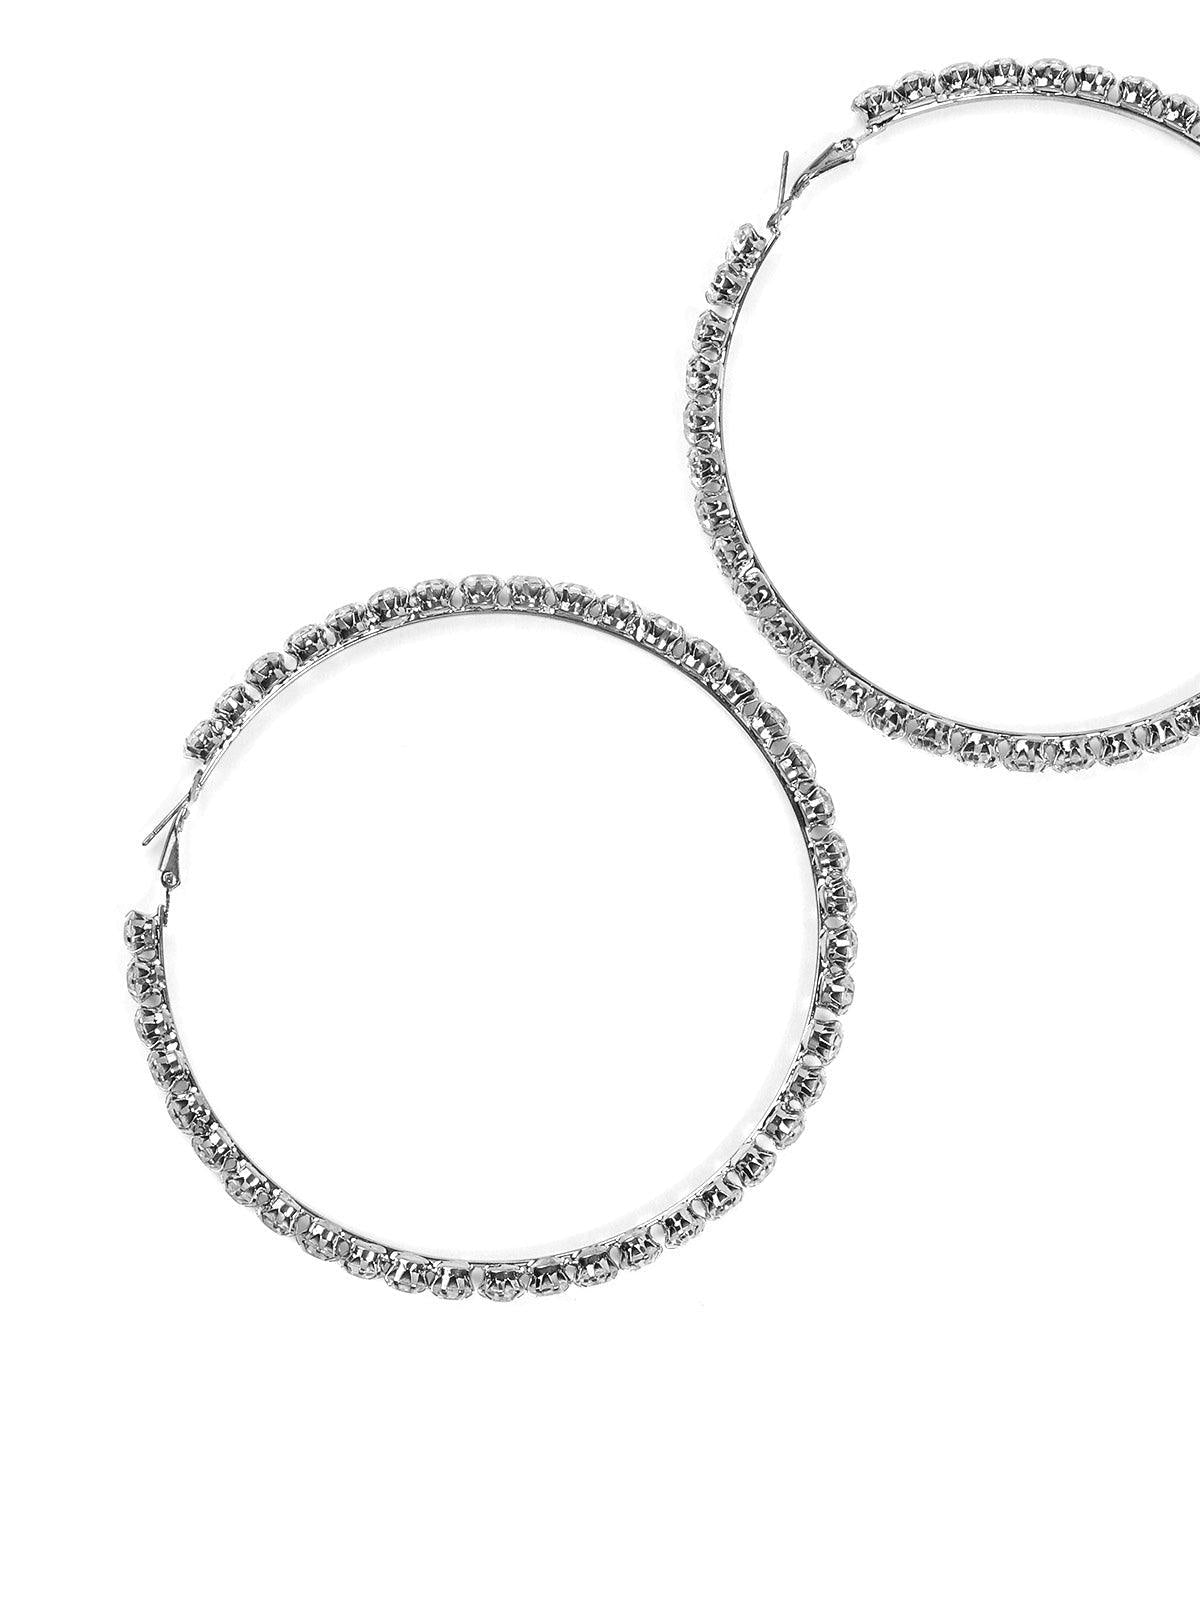 Round Silver Tone Hoops! - Odette